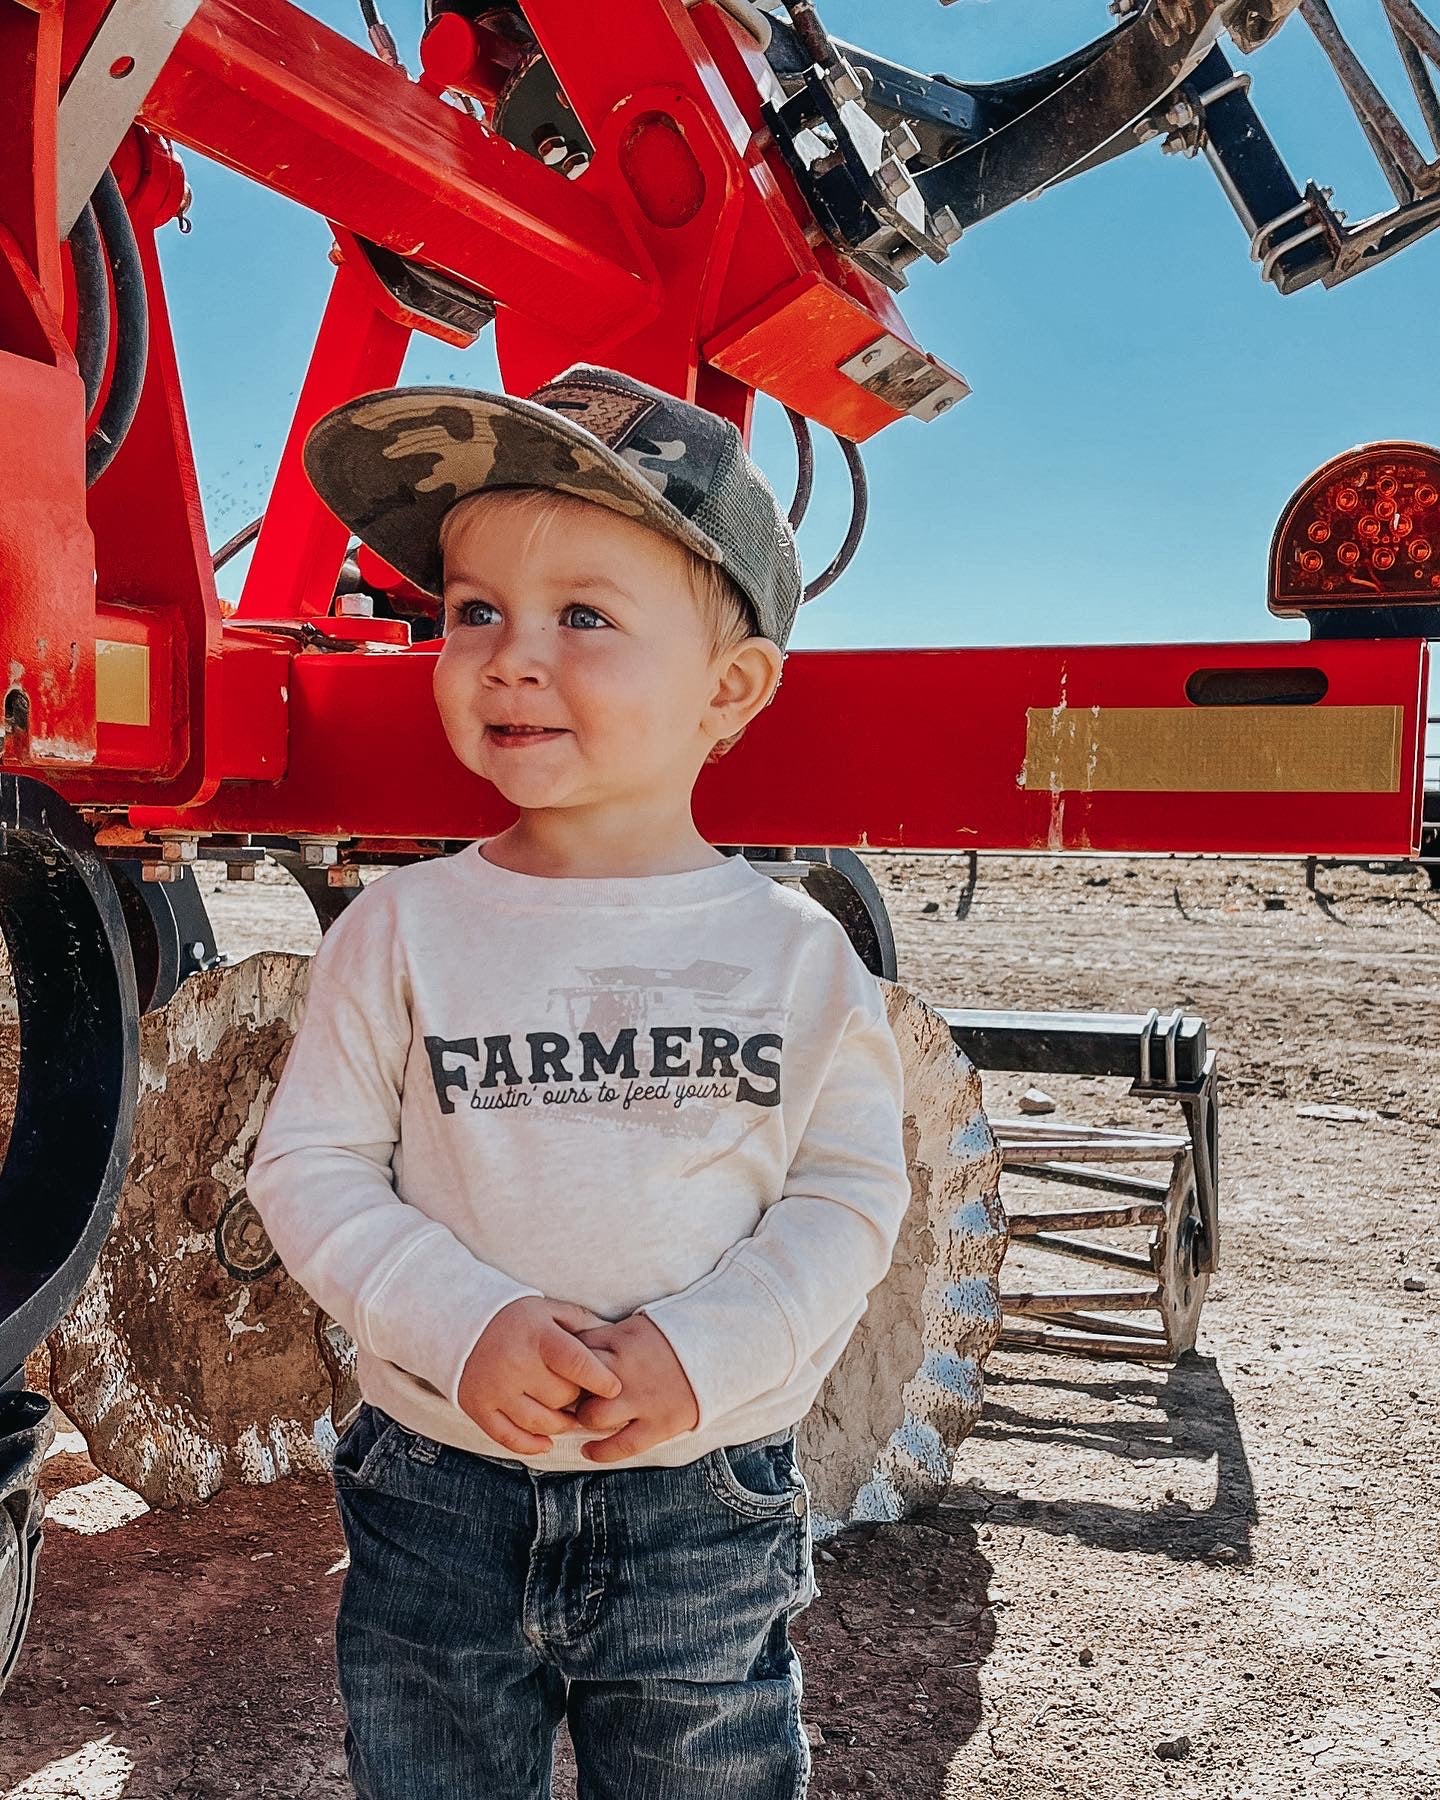 the |Farmers| Bustin Ours pullover littles